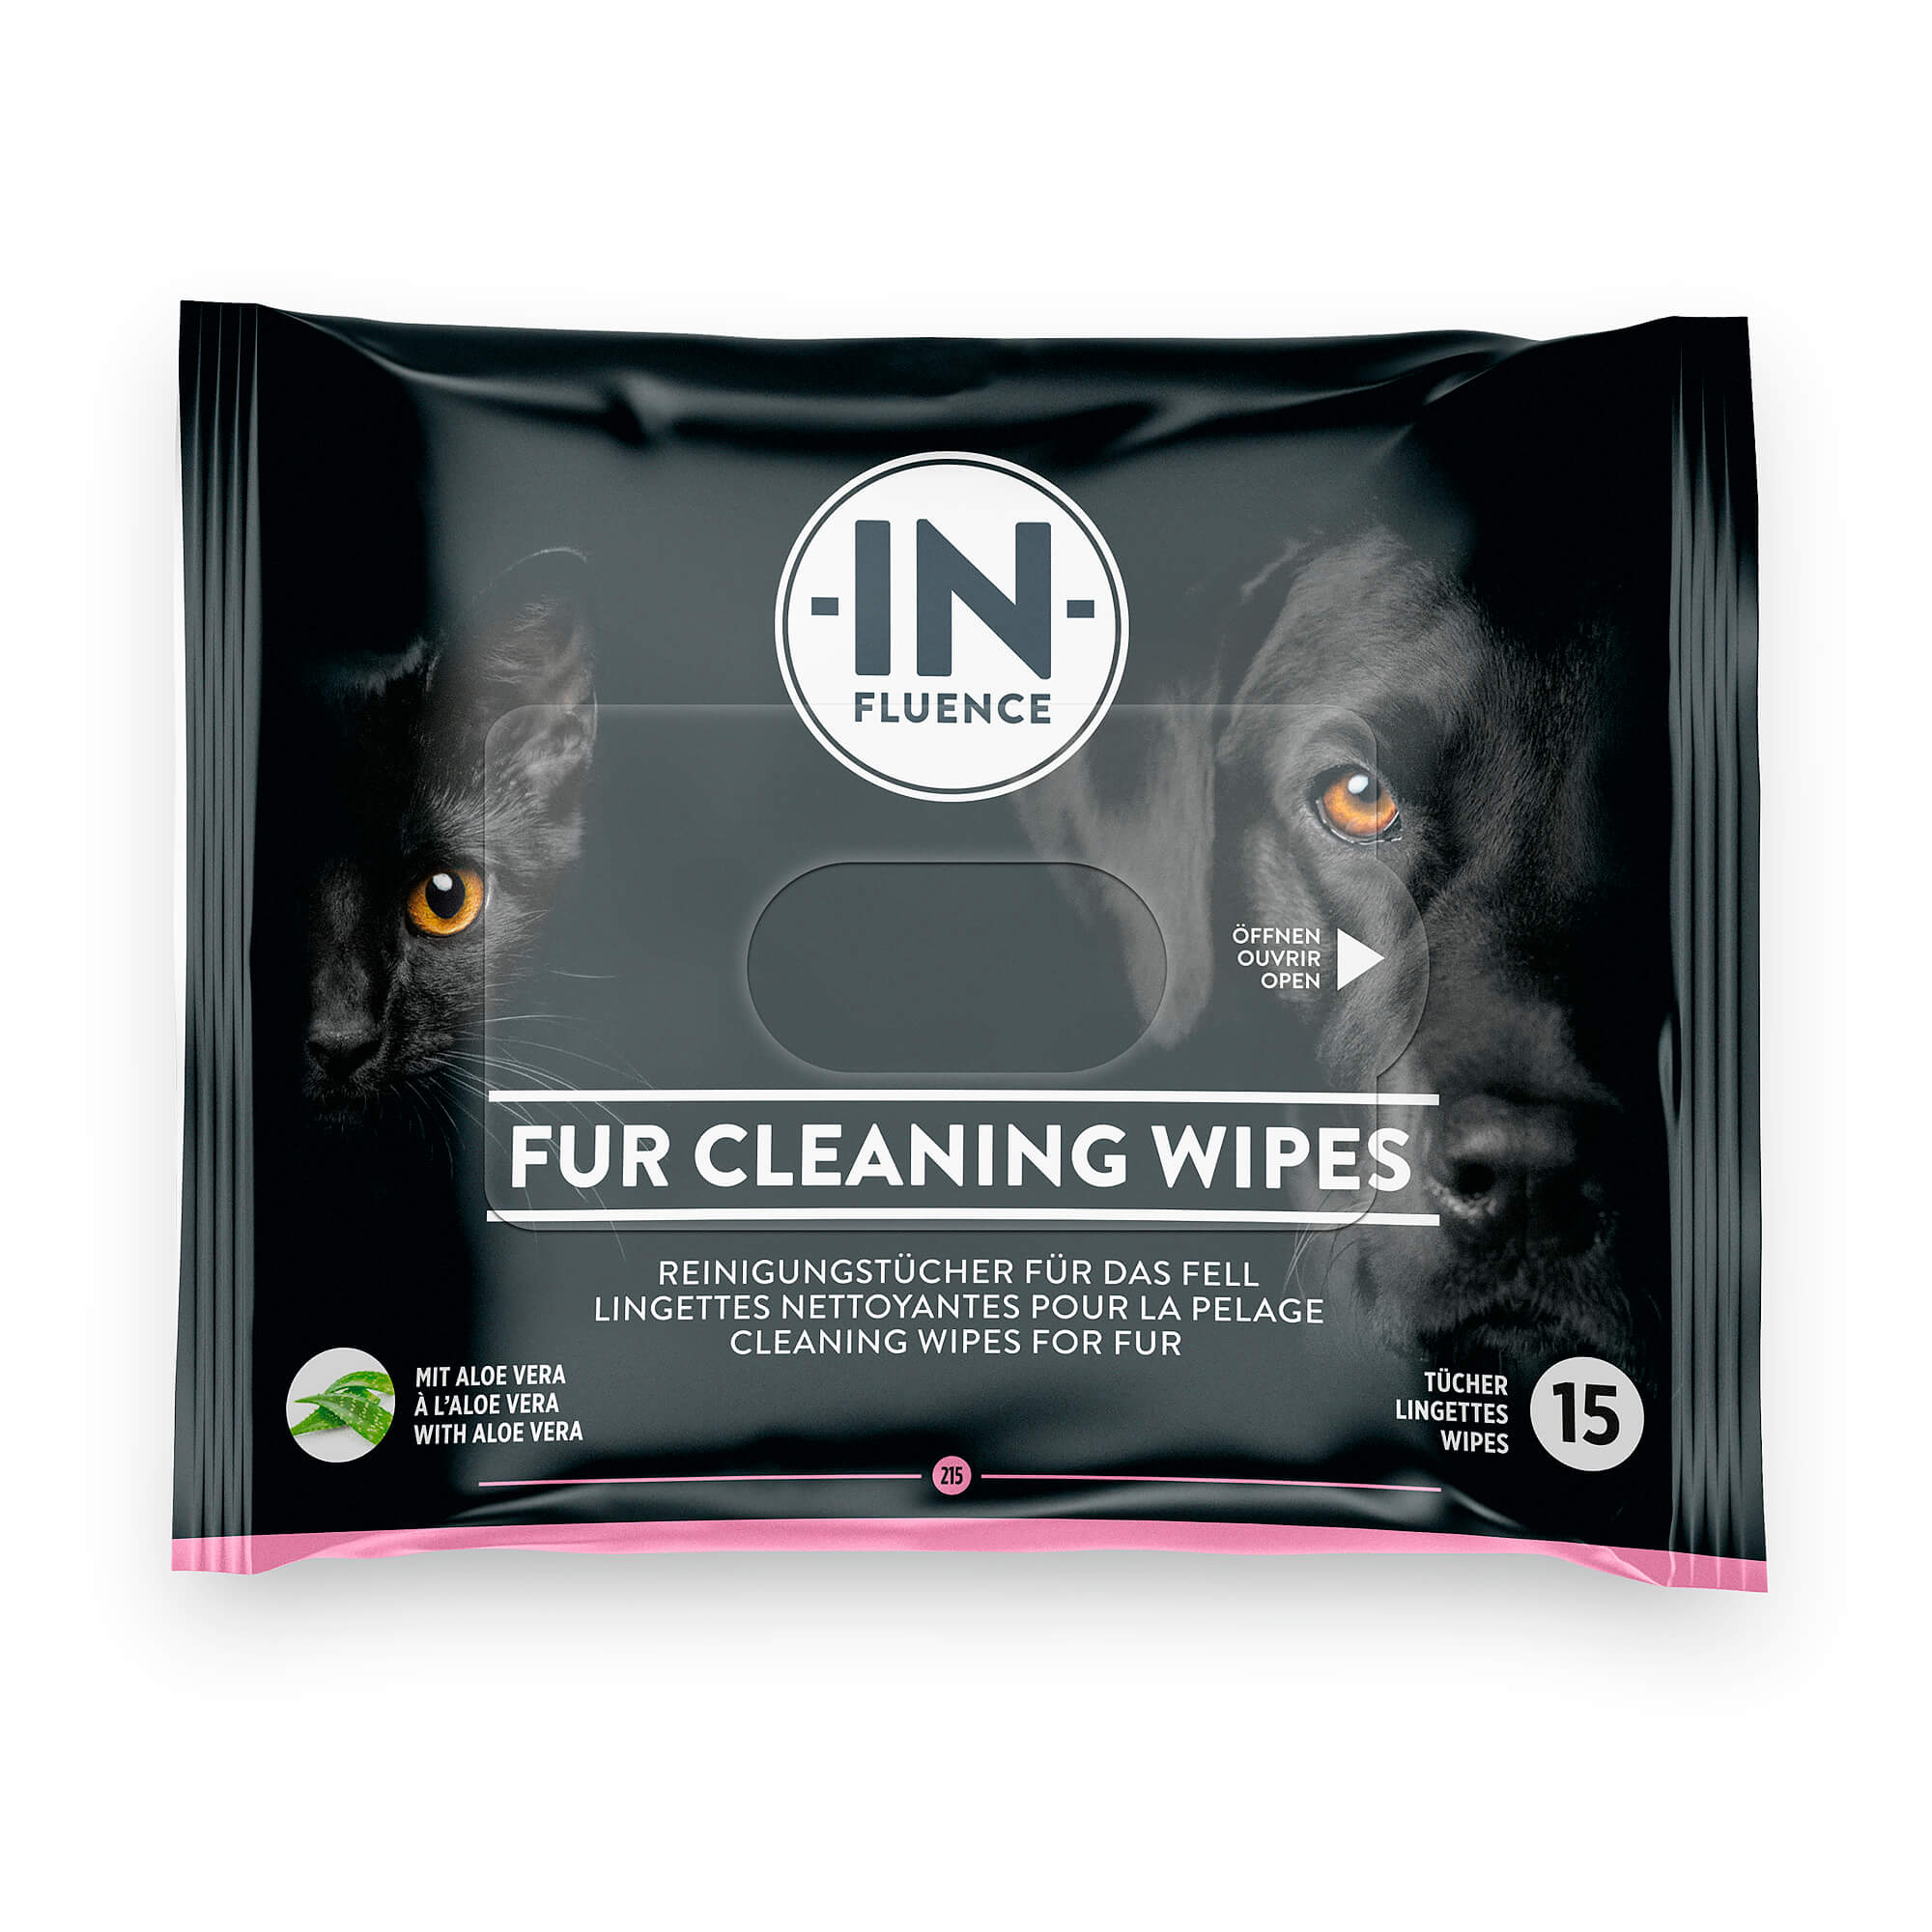 BusinessCom_IN-FLUENCE_Cleaning Wipes